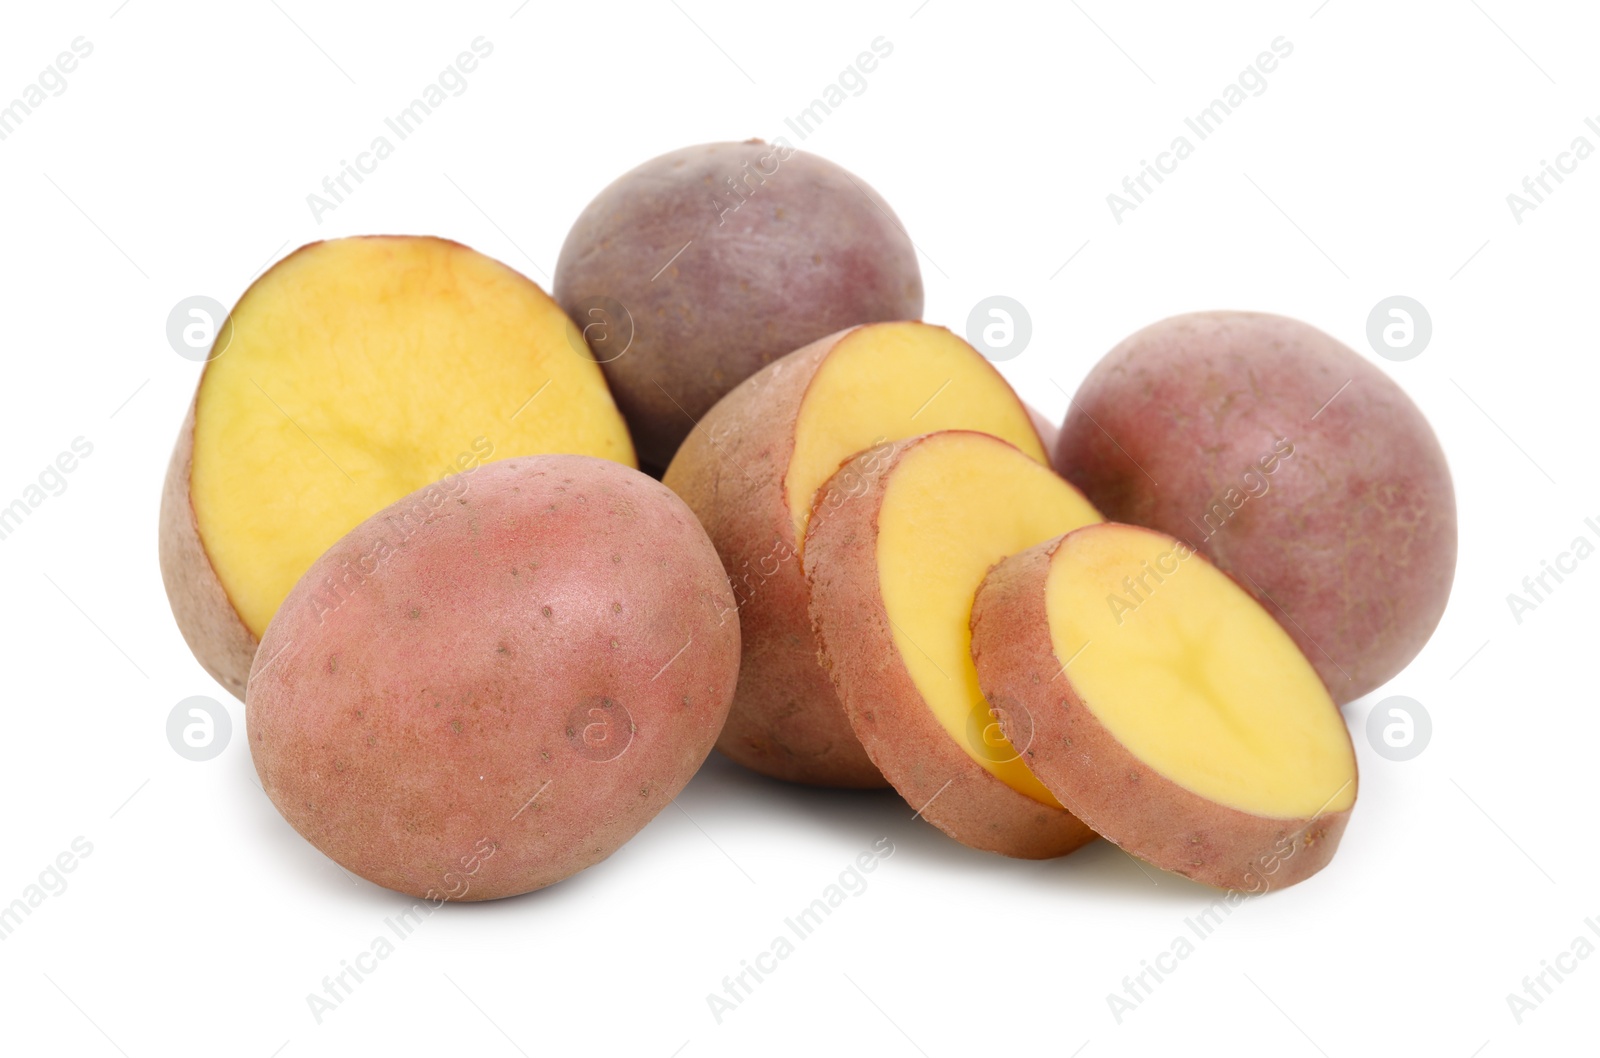 Photo of Whole and cut fresh potatoes on white background